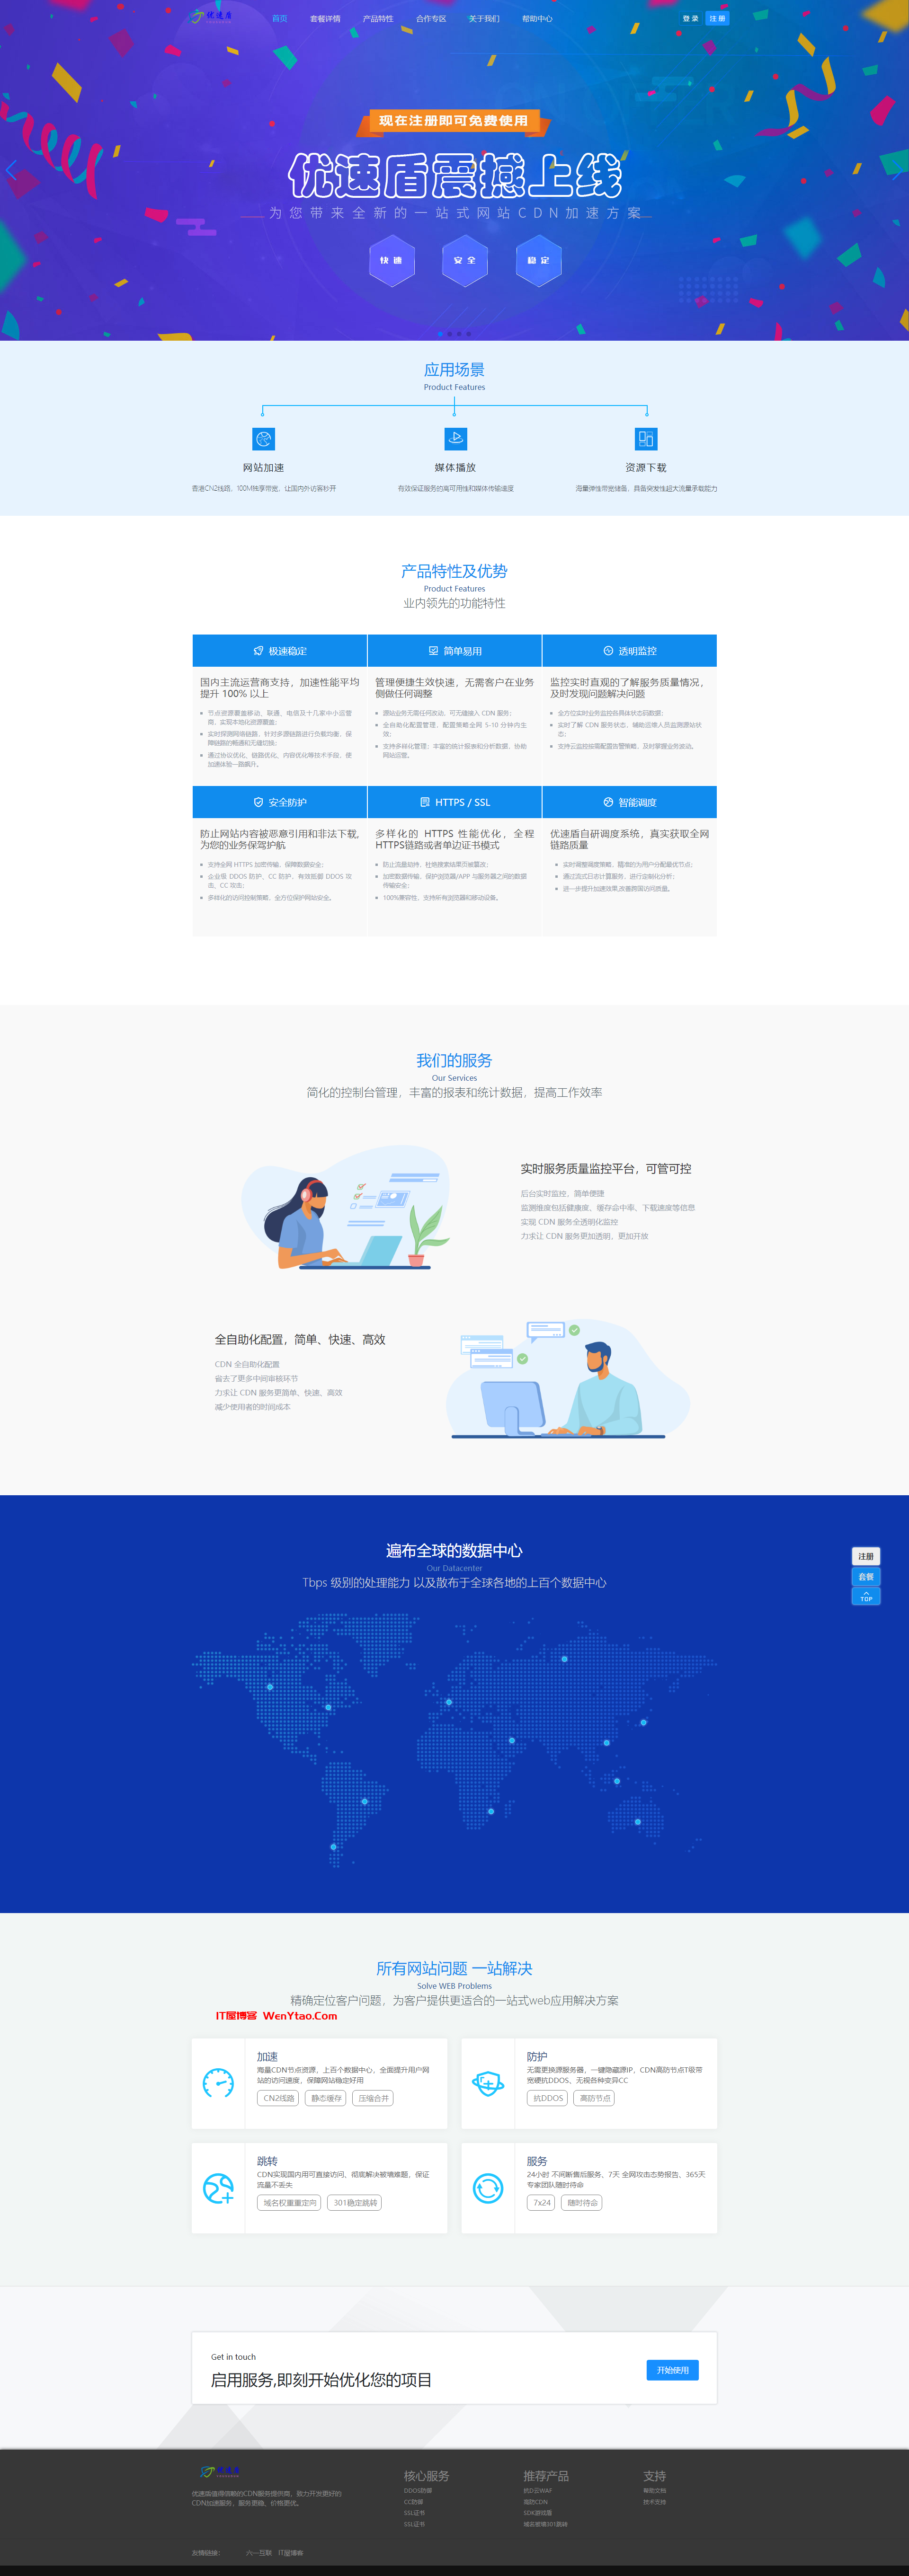  Yousudun CDN official website template CDN official website template CDNFLY official website template with package details page effect comparison before and after using CDN dynamic page networknbsp template CDN address official website page 1